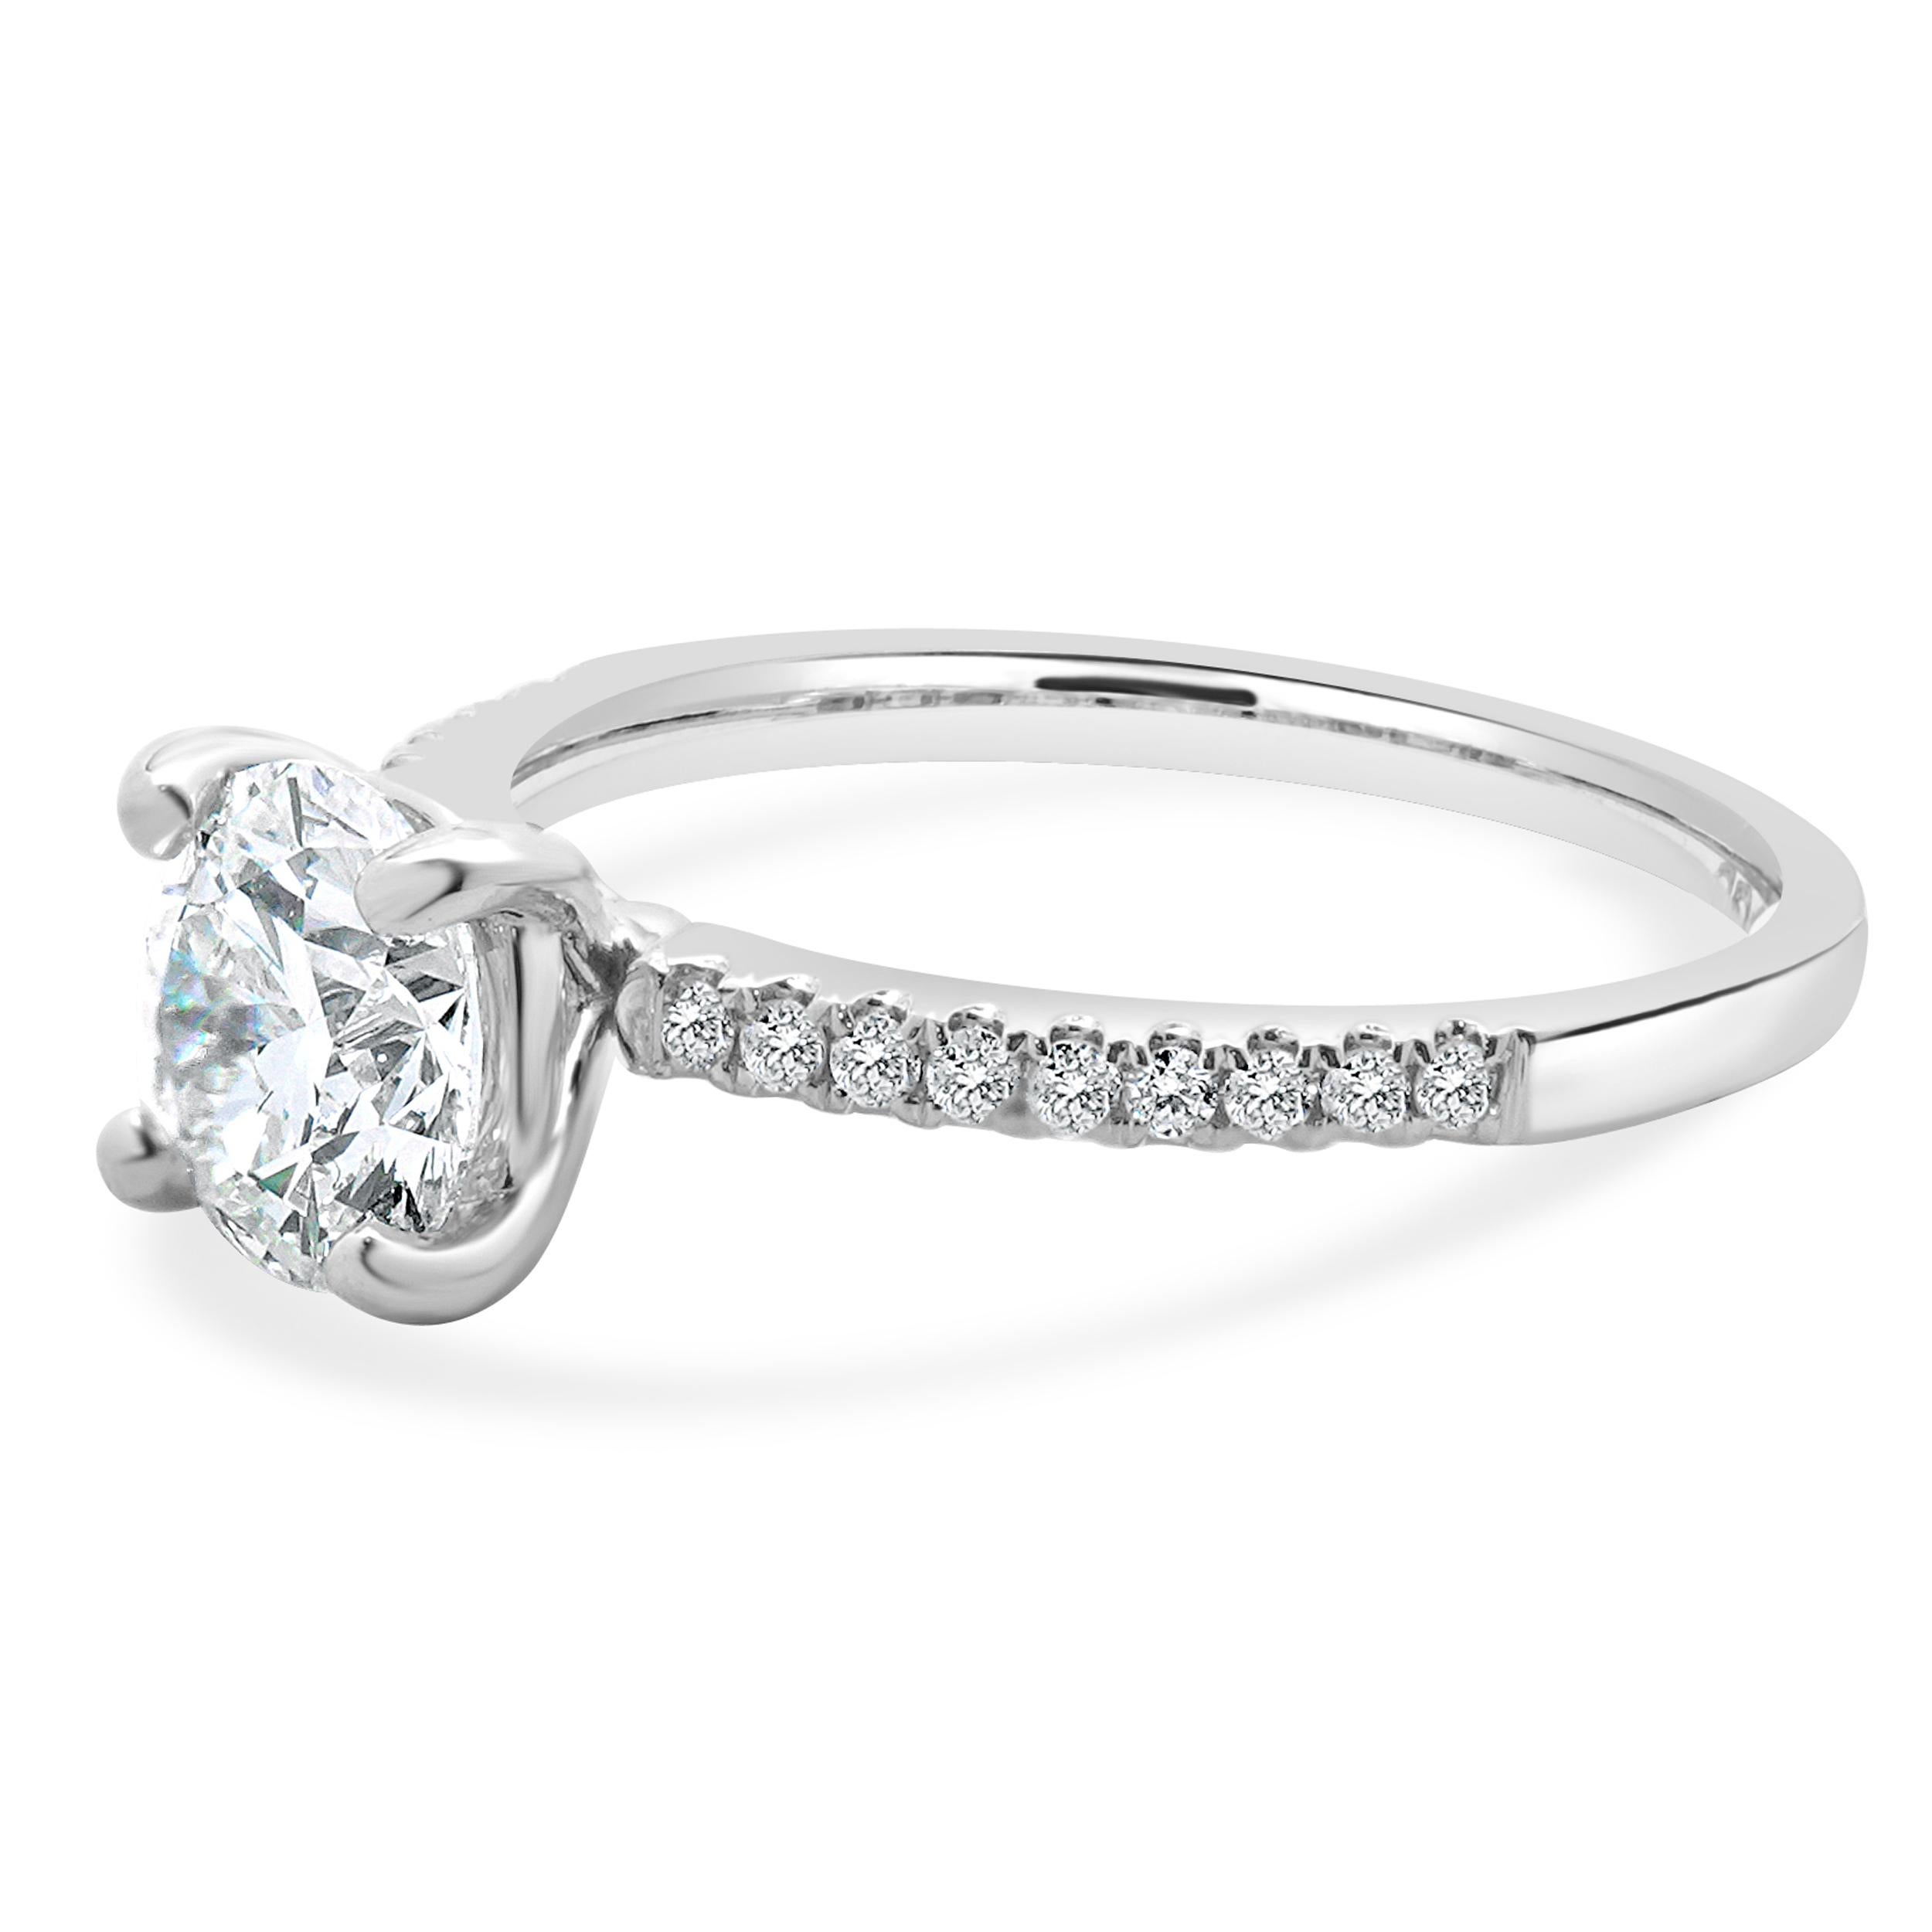 Designer: custom
Material: 14K White Gold
Diamond: 1 round brilliant cut = 1.22ct
Color: F
Clarity: VVS2
Diamond:  round brilliant = 0.14cttw
Color: G
Clarity: SI1
Ring Size: 6.5 (complimentary sizing available)
Weight: 2.64 grams
